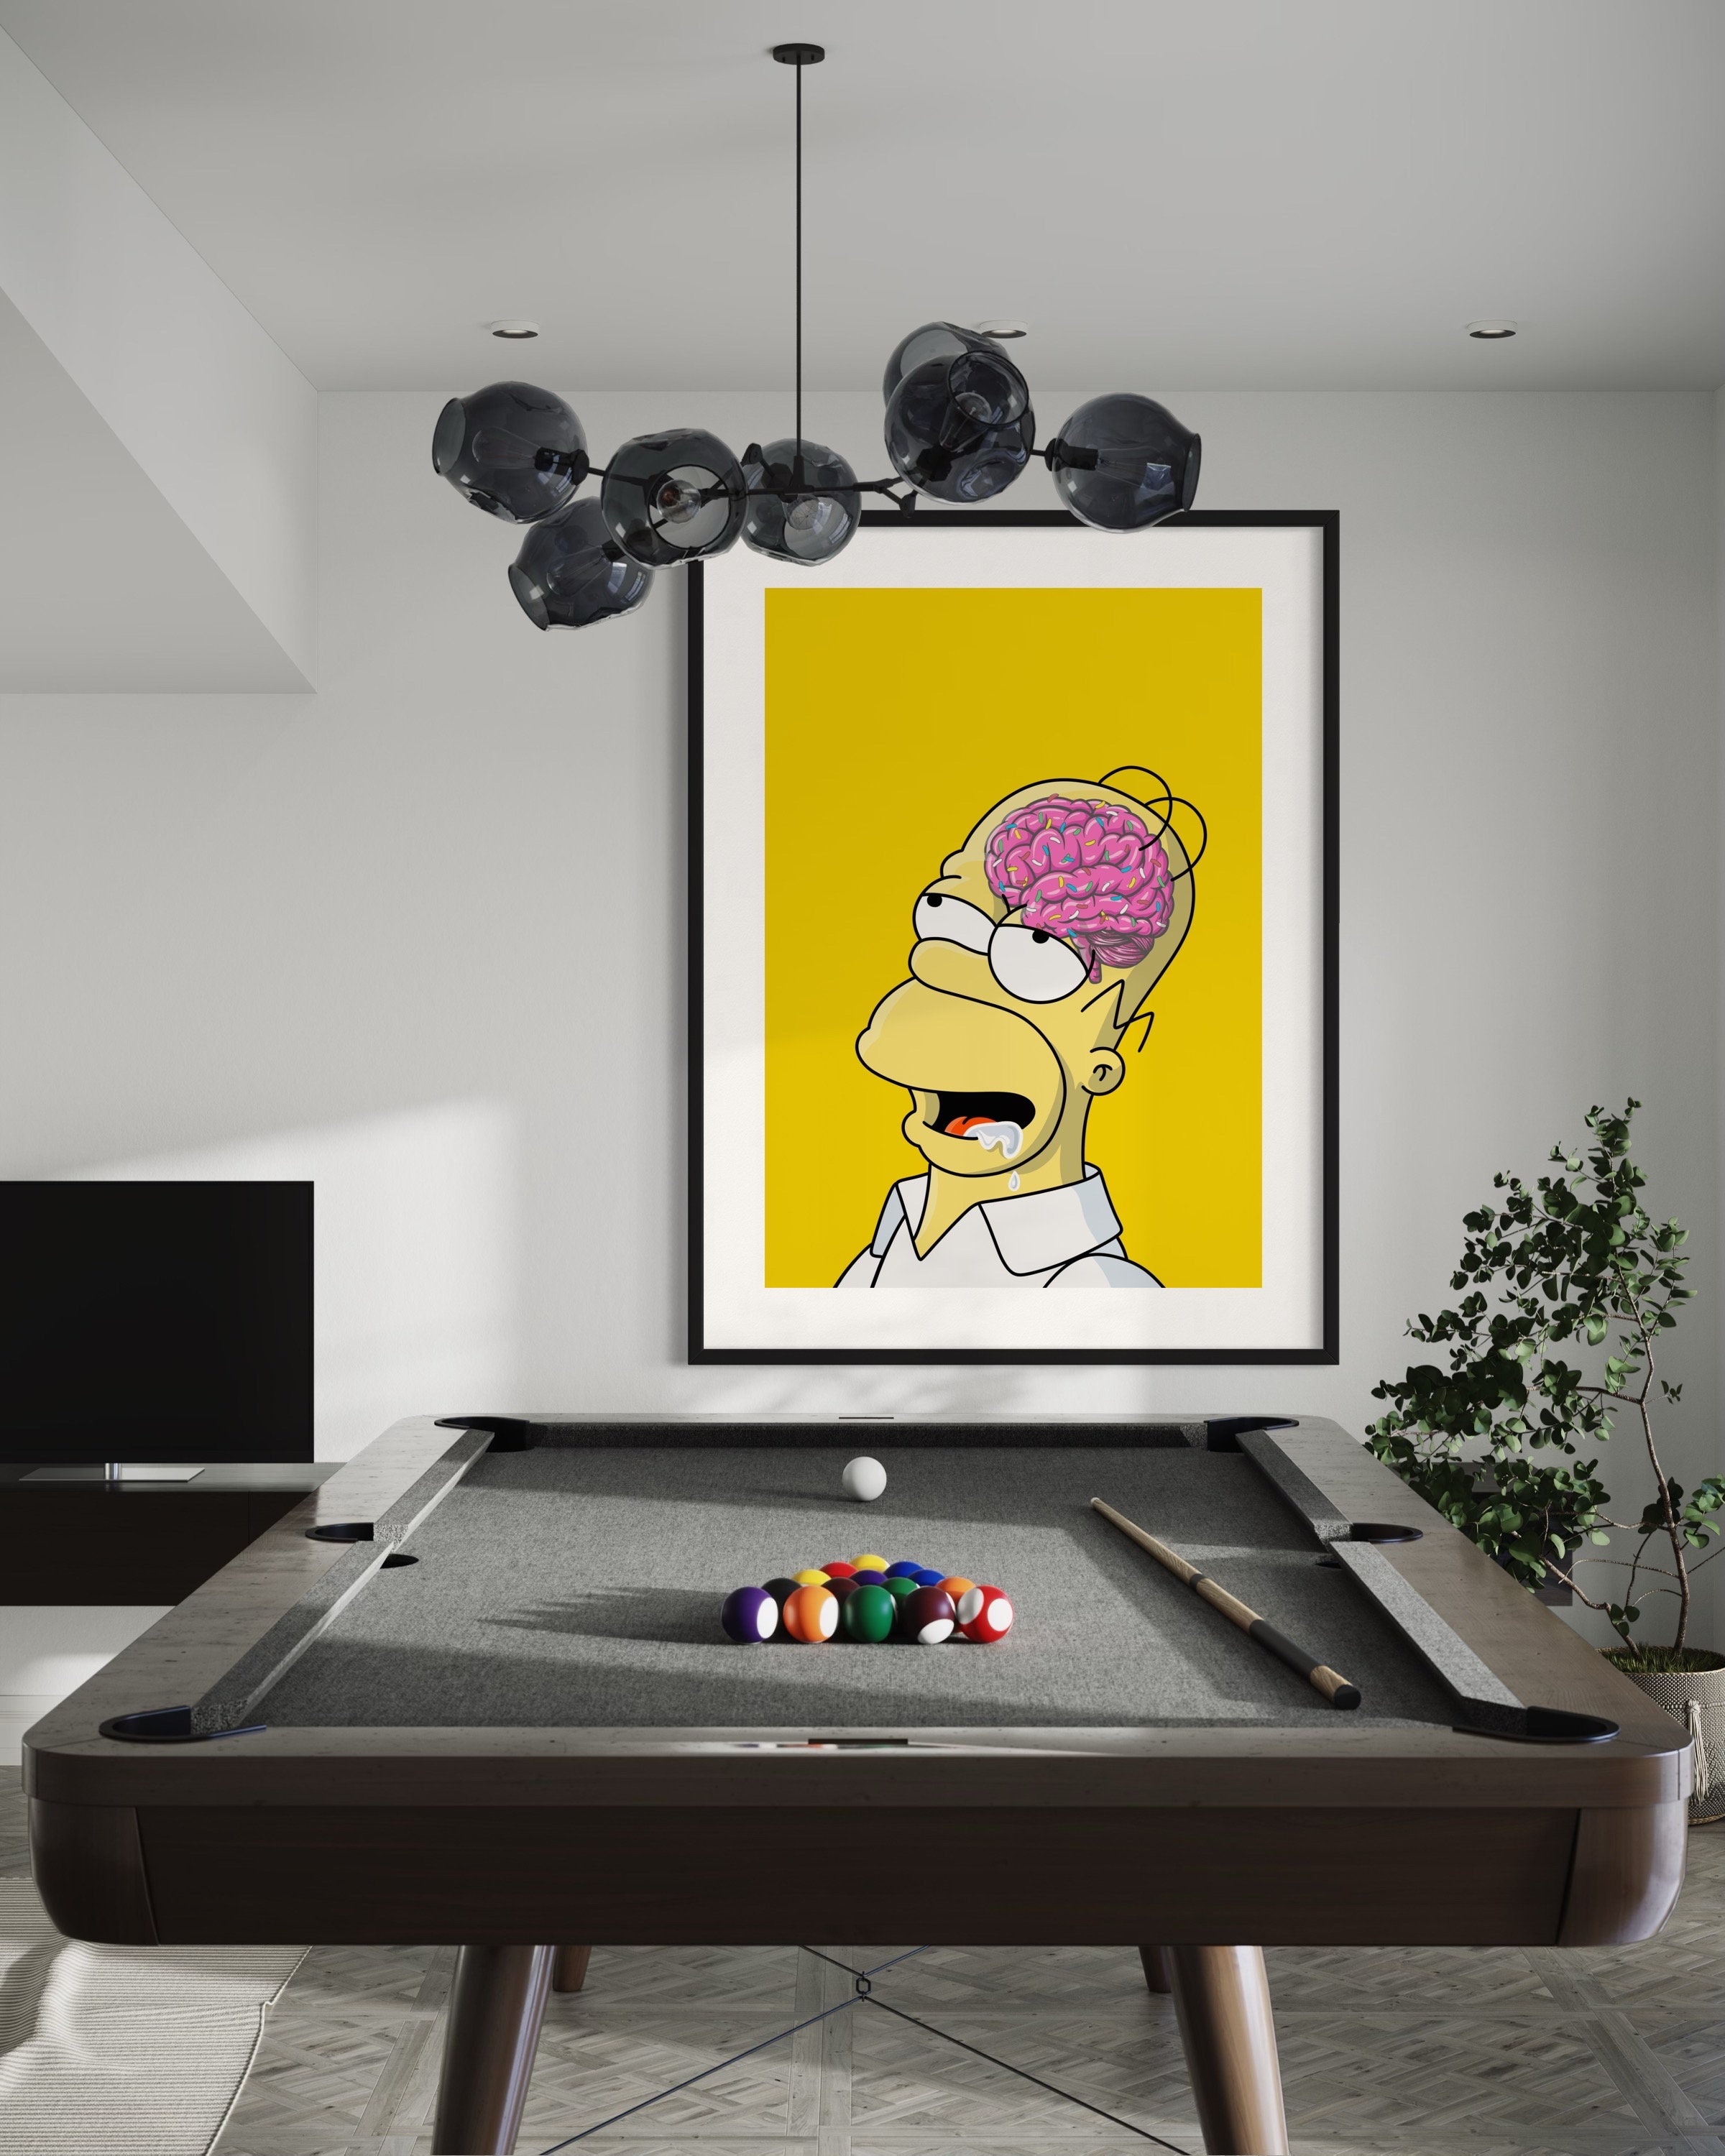 Discover The Simpsons Poster, Minimalist Movie Poster, Wall Art Print